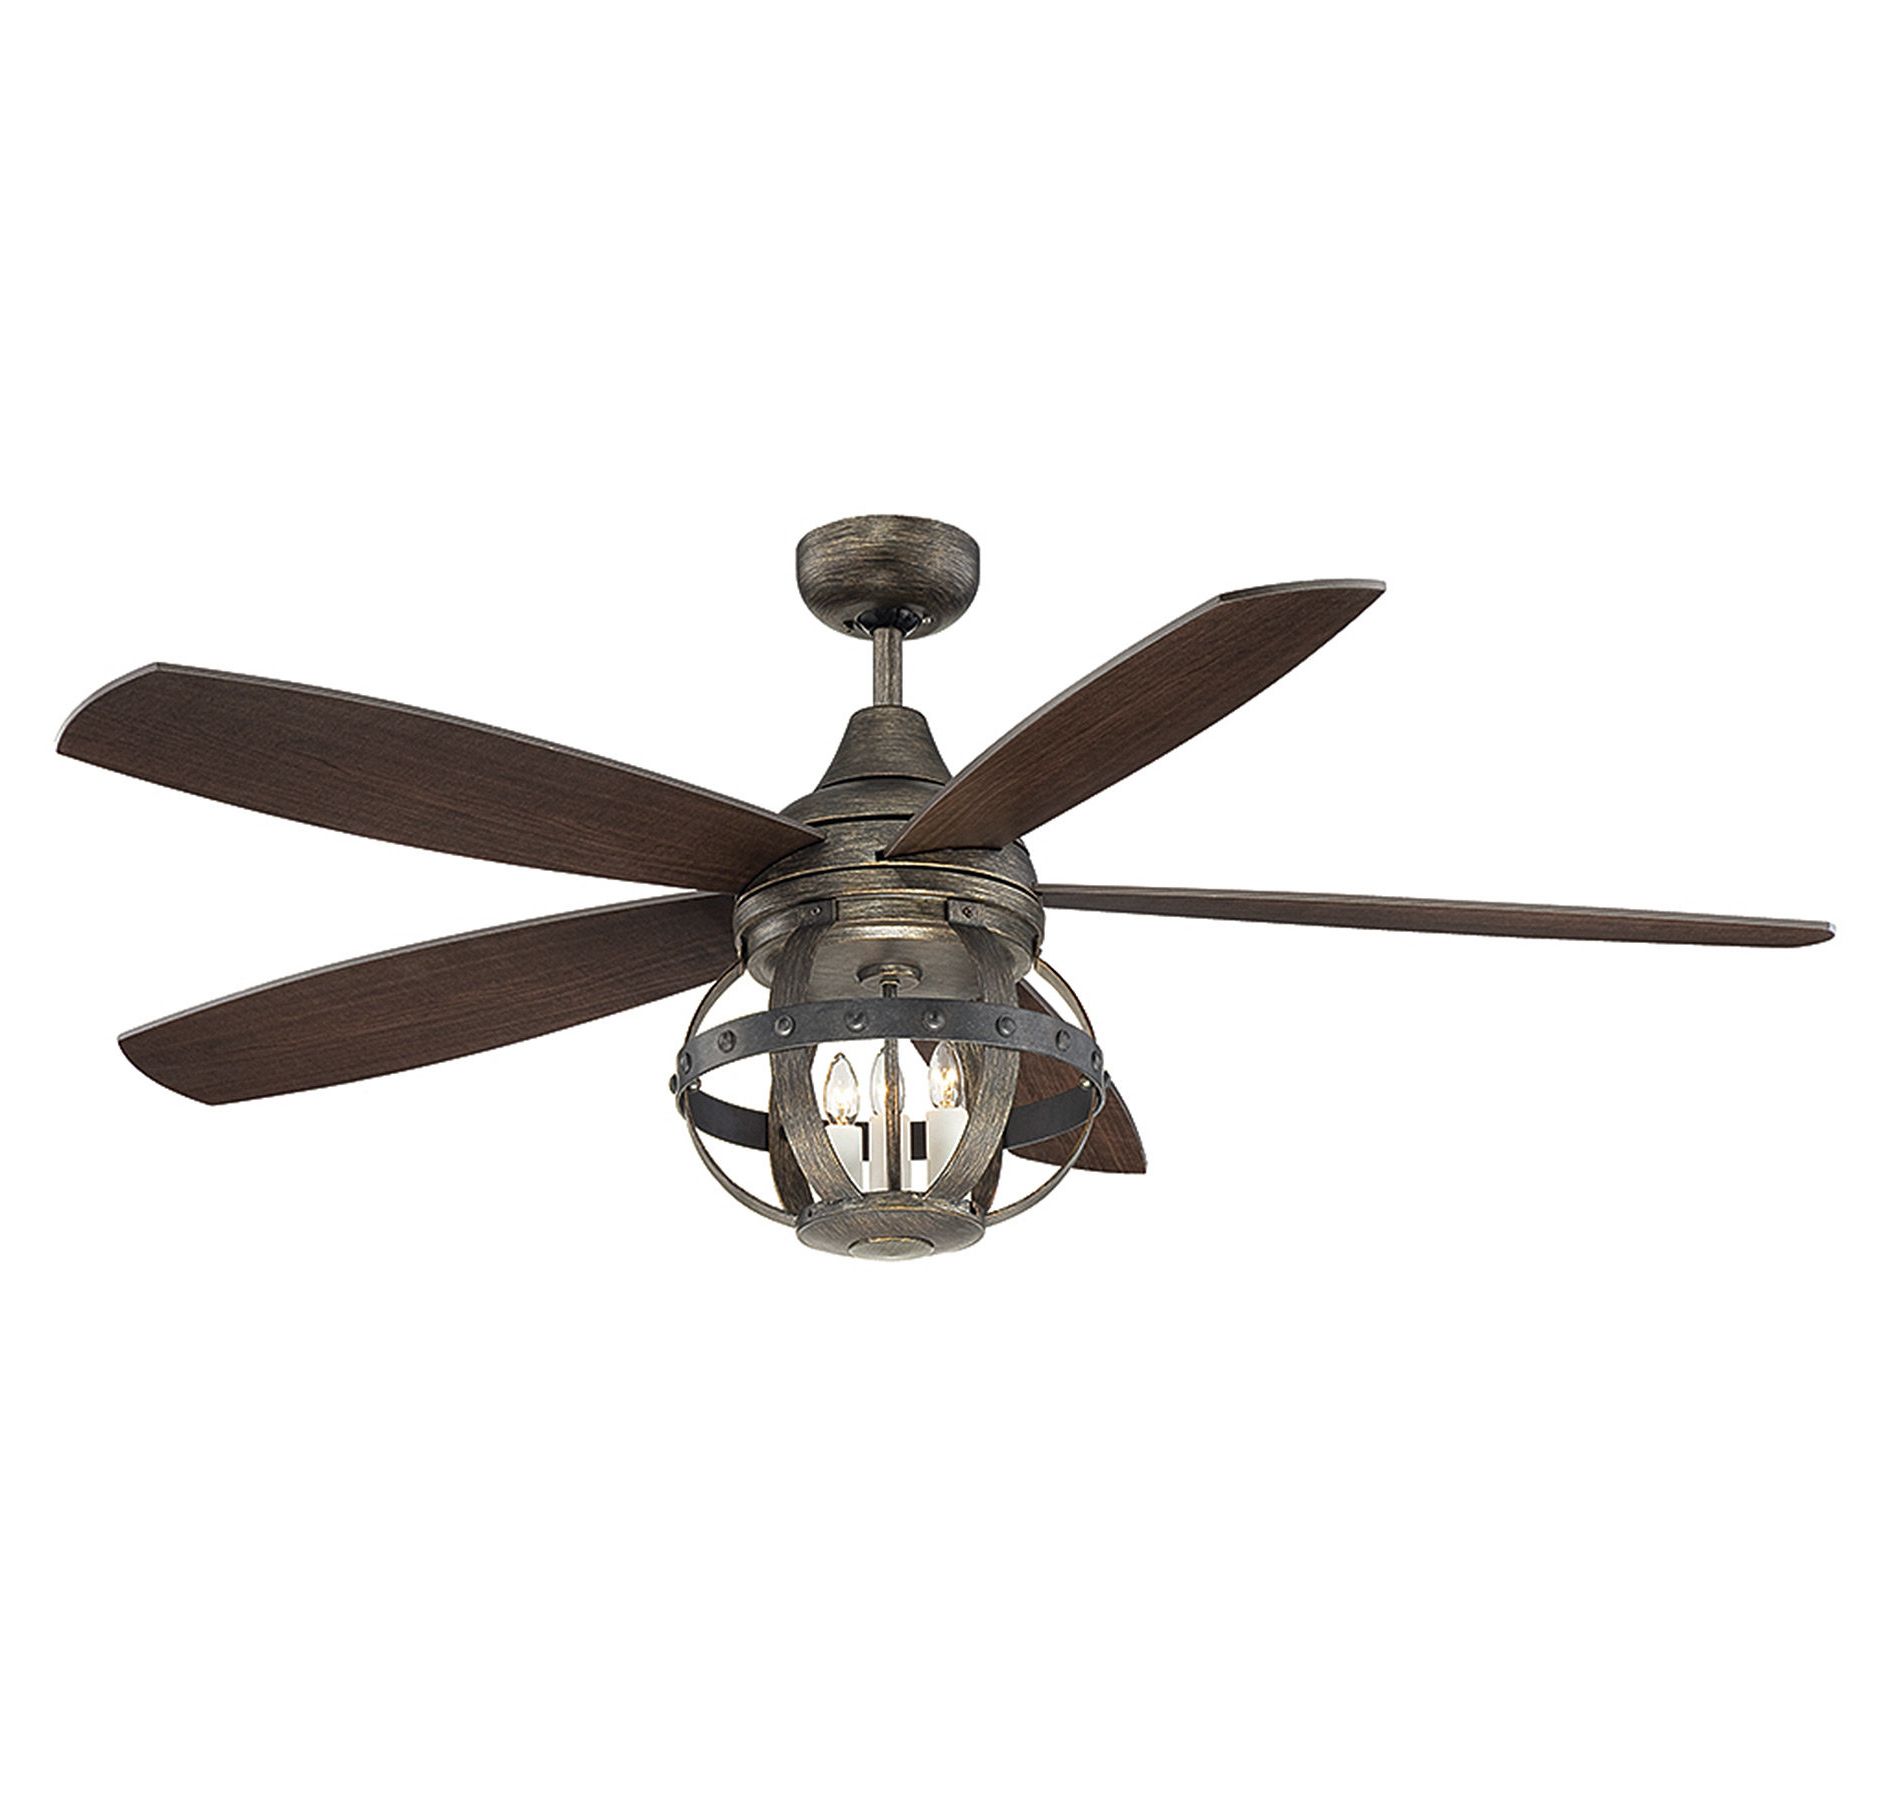 Wilburton 3 Blade Outdoor Ceiling Fans With Most Current 52" Wilburton 5 Blade Ceiling Fan With Remote, Light Kit Included (Photo 4 of 20)